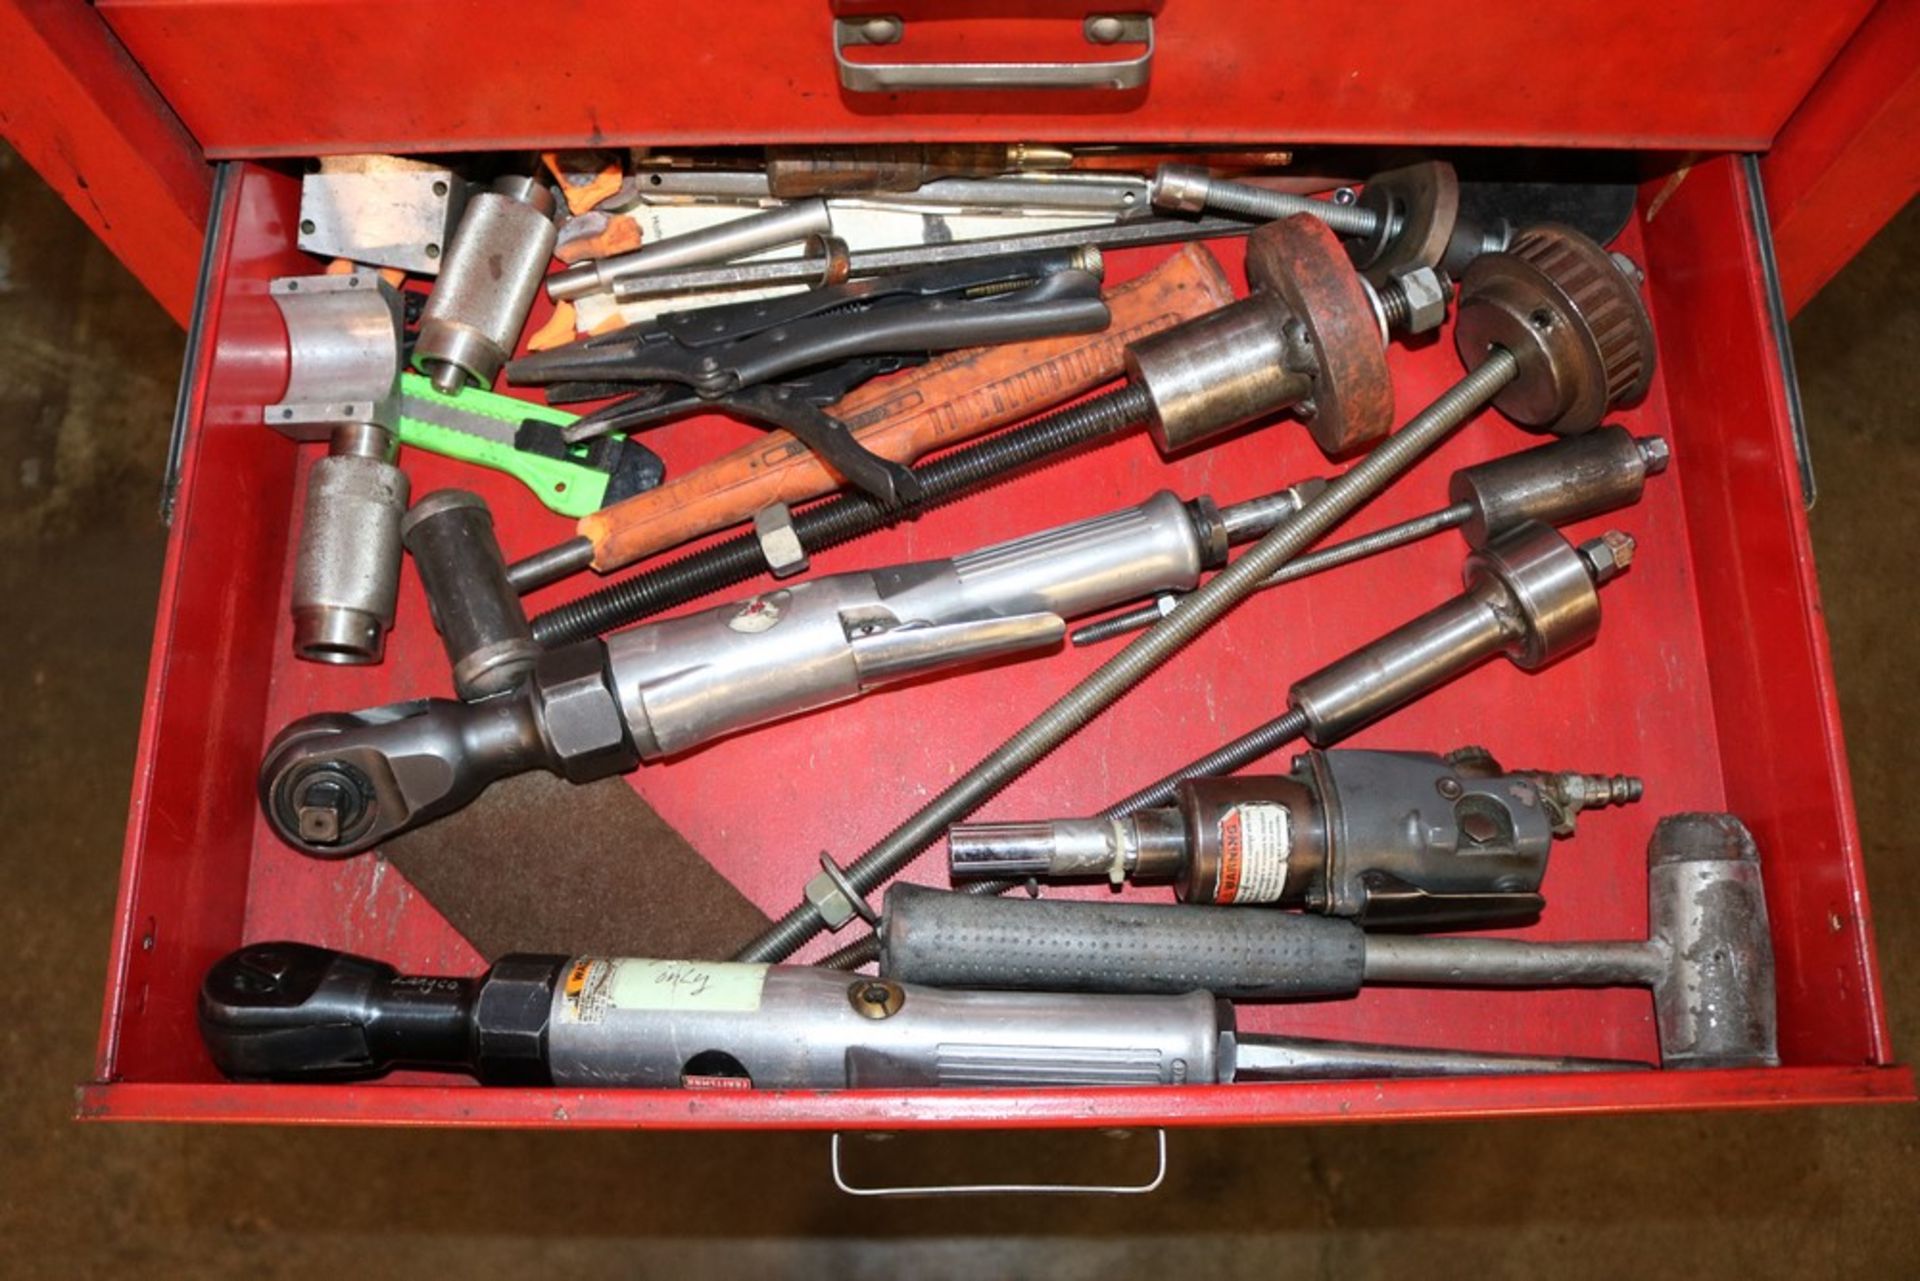 Stackon Rolling Tool Box with Contents "Pnuematic Tools, Tooling, Handtools and Others" - Image 8 of 8